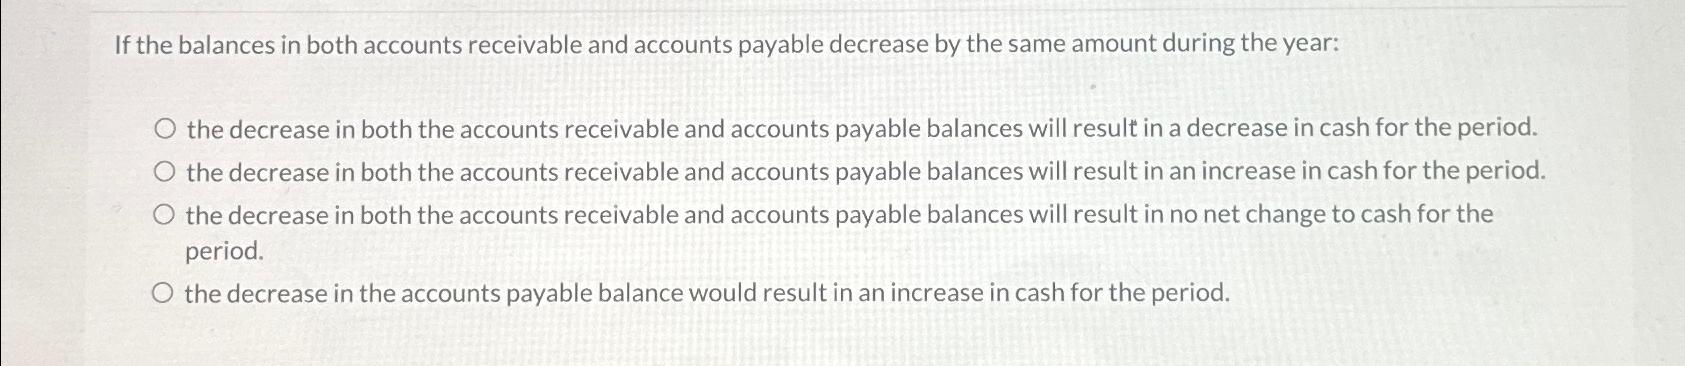 If the balances in both accounts receivable and accounts payable decrease by the same amount during the year: